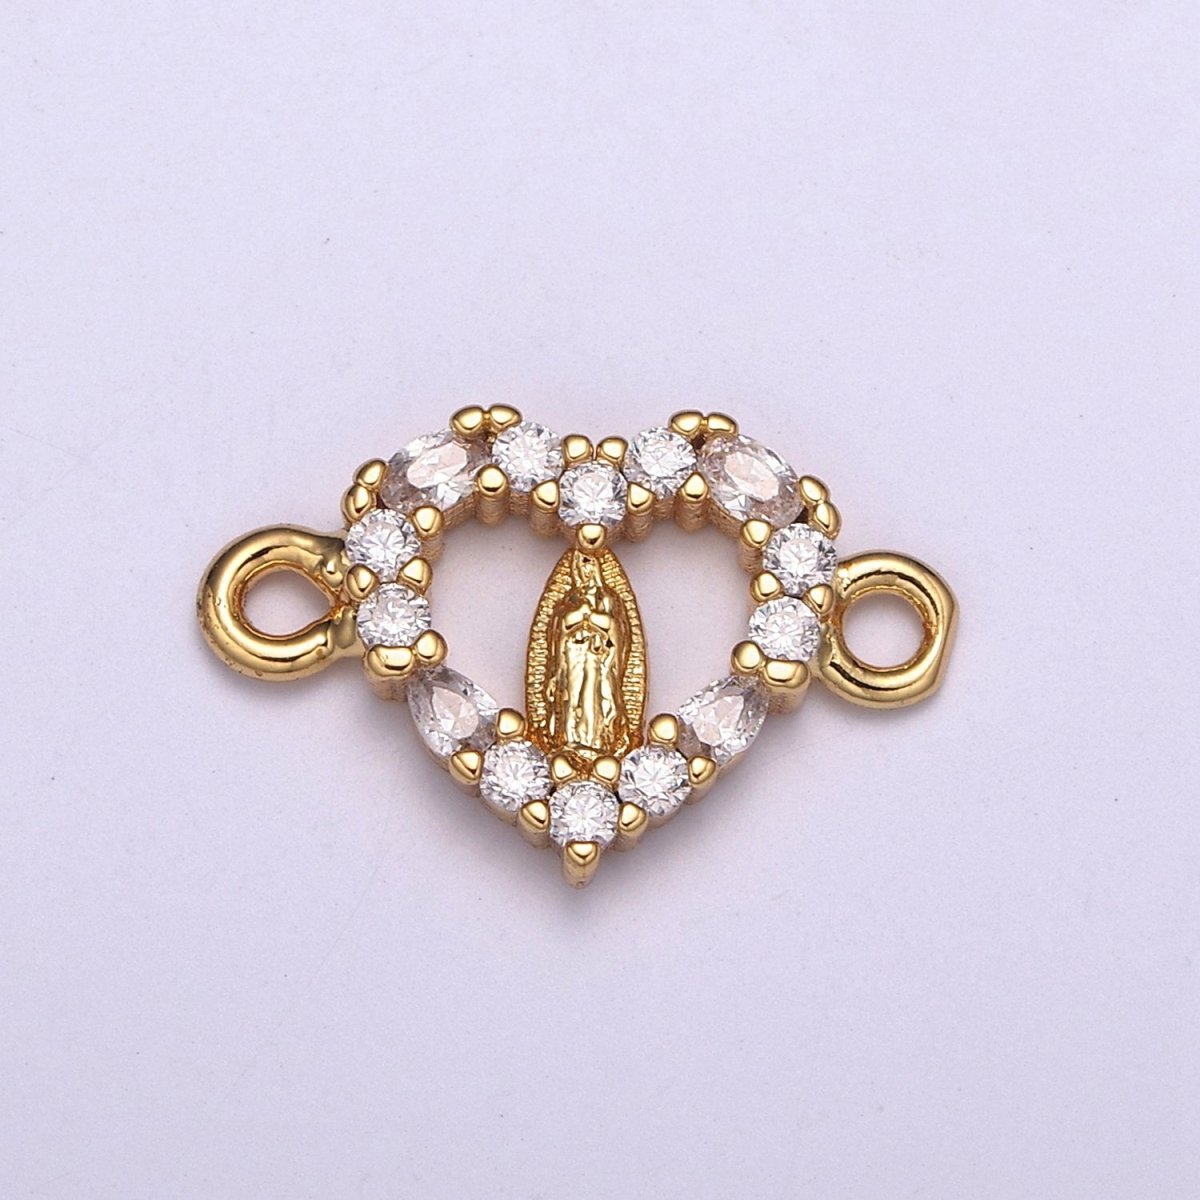 Mini Heart Cz Gold Lady Guadalupe Charm Link Connector for Bracelet Necklace Supply Component F-068 - DLUXCA